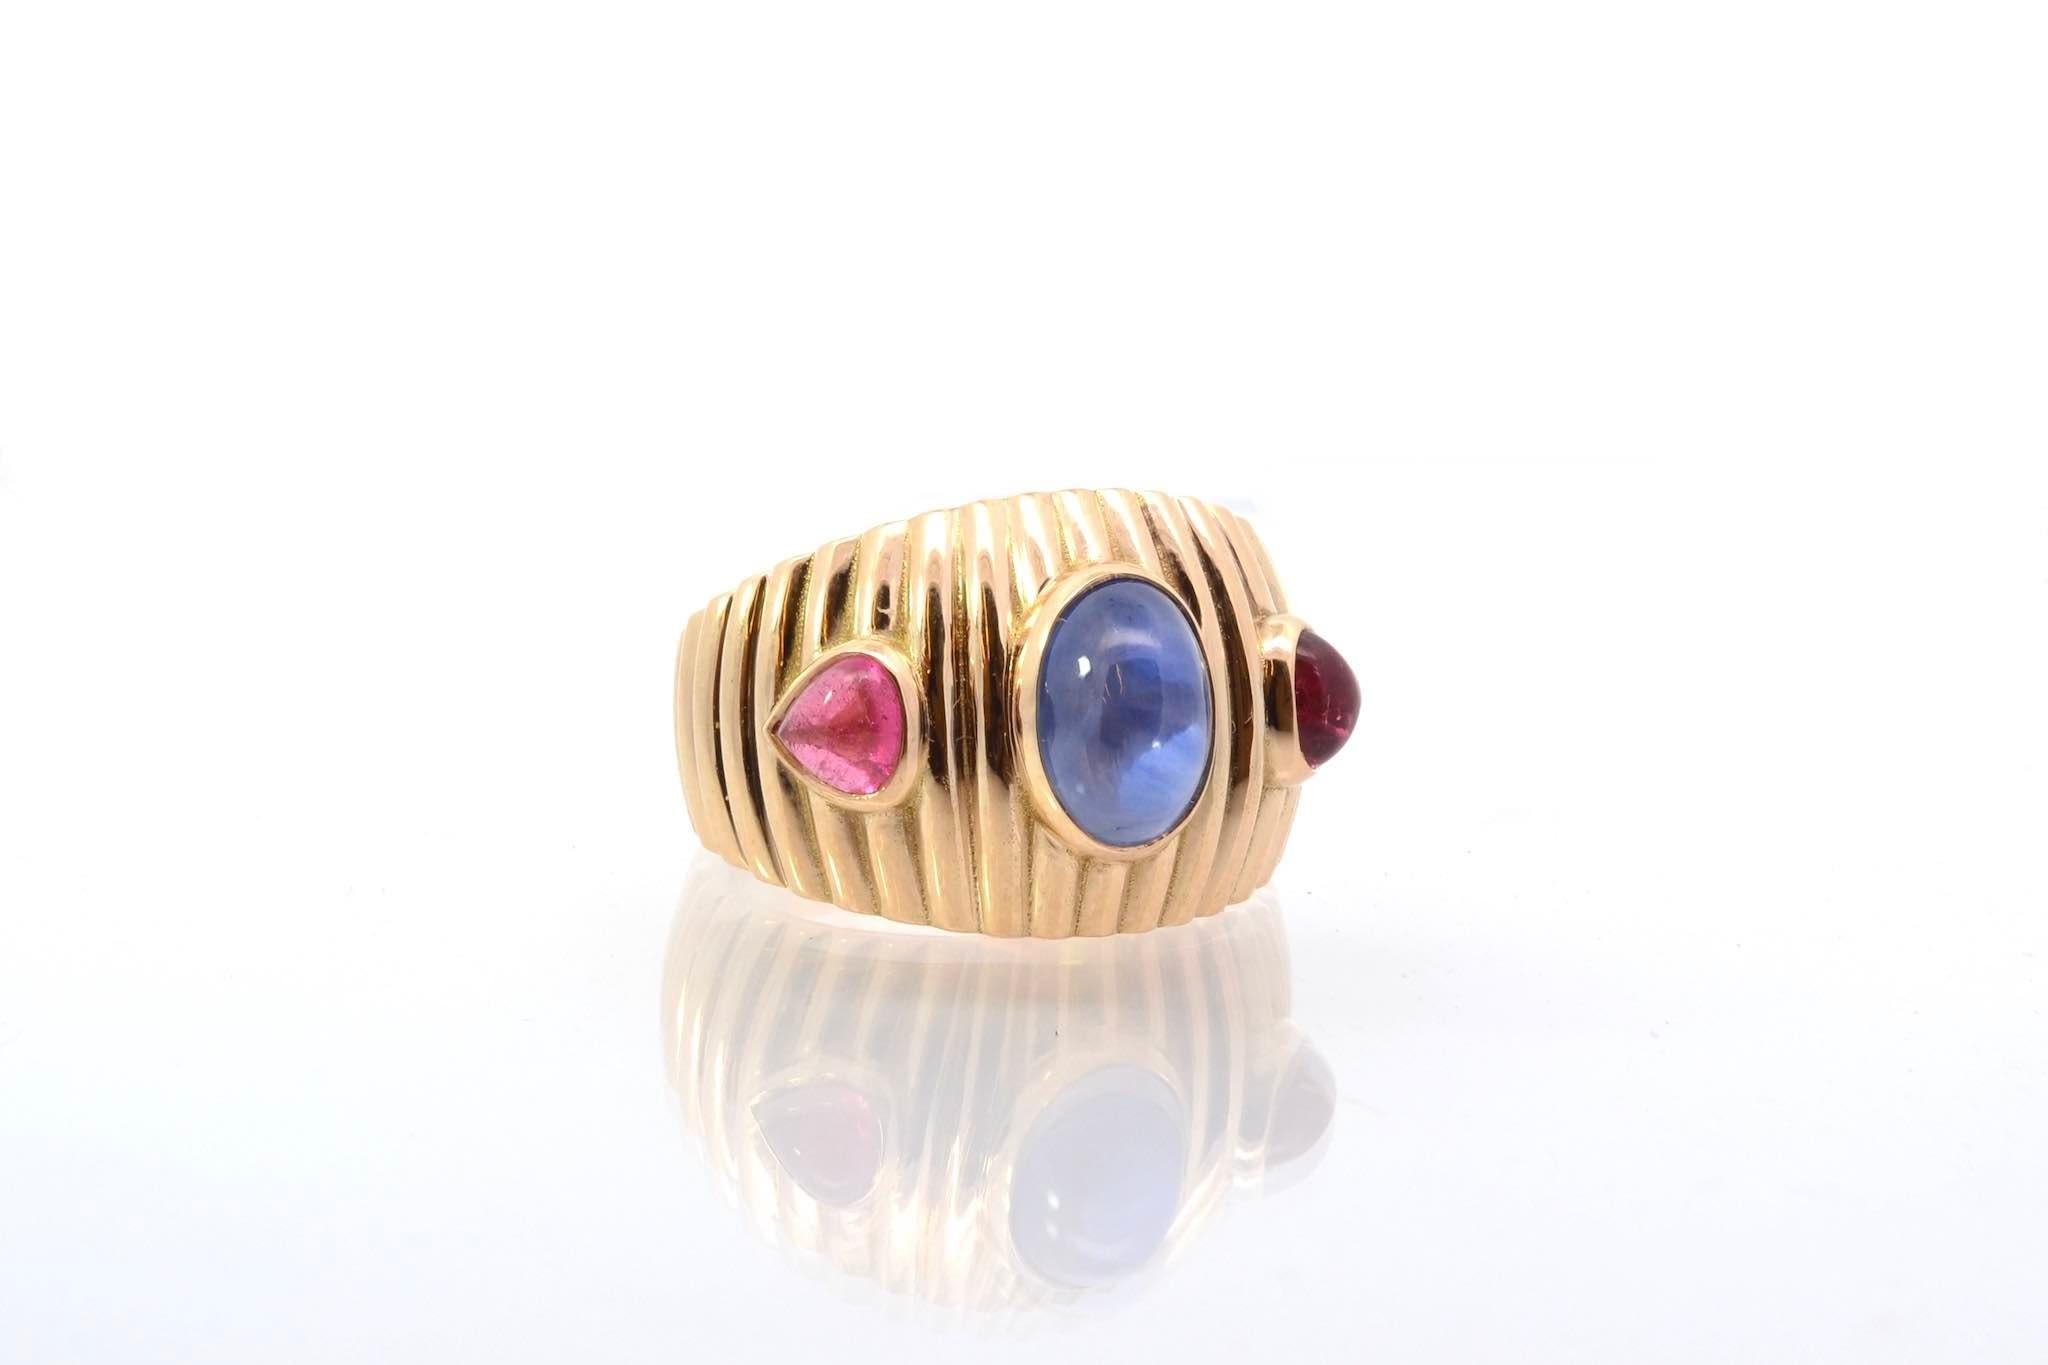 Cabochon Sapphire and cabochon tourmaline ring in gold For Sale